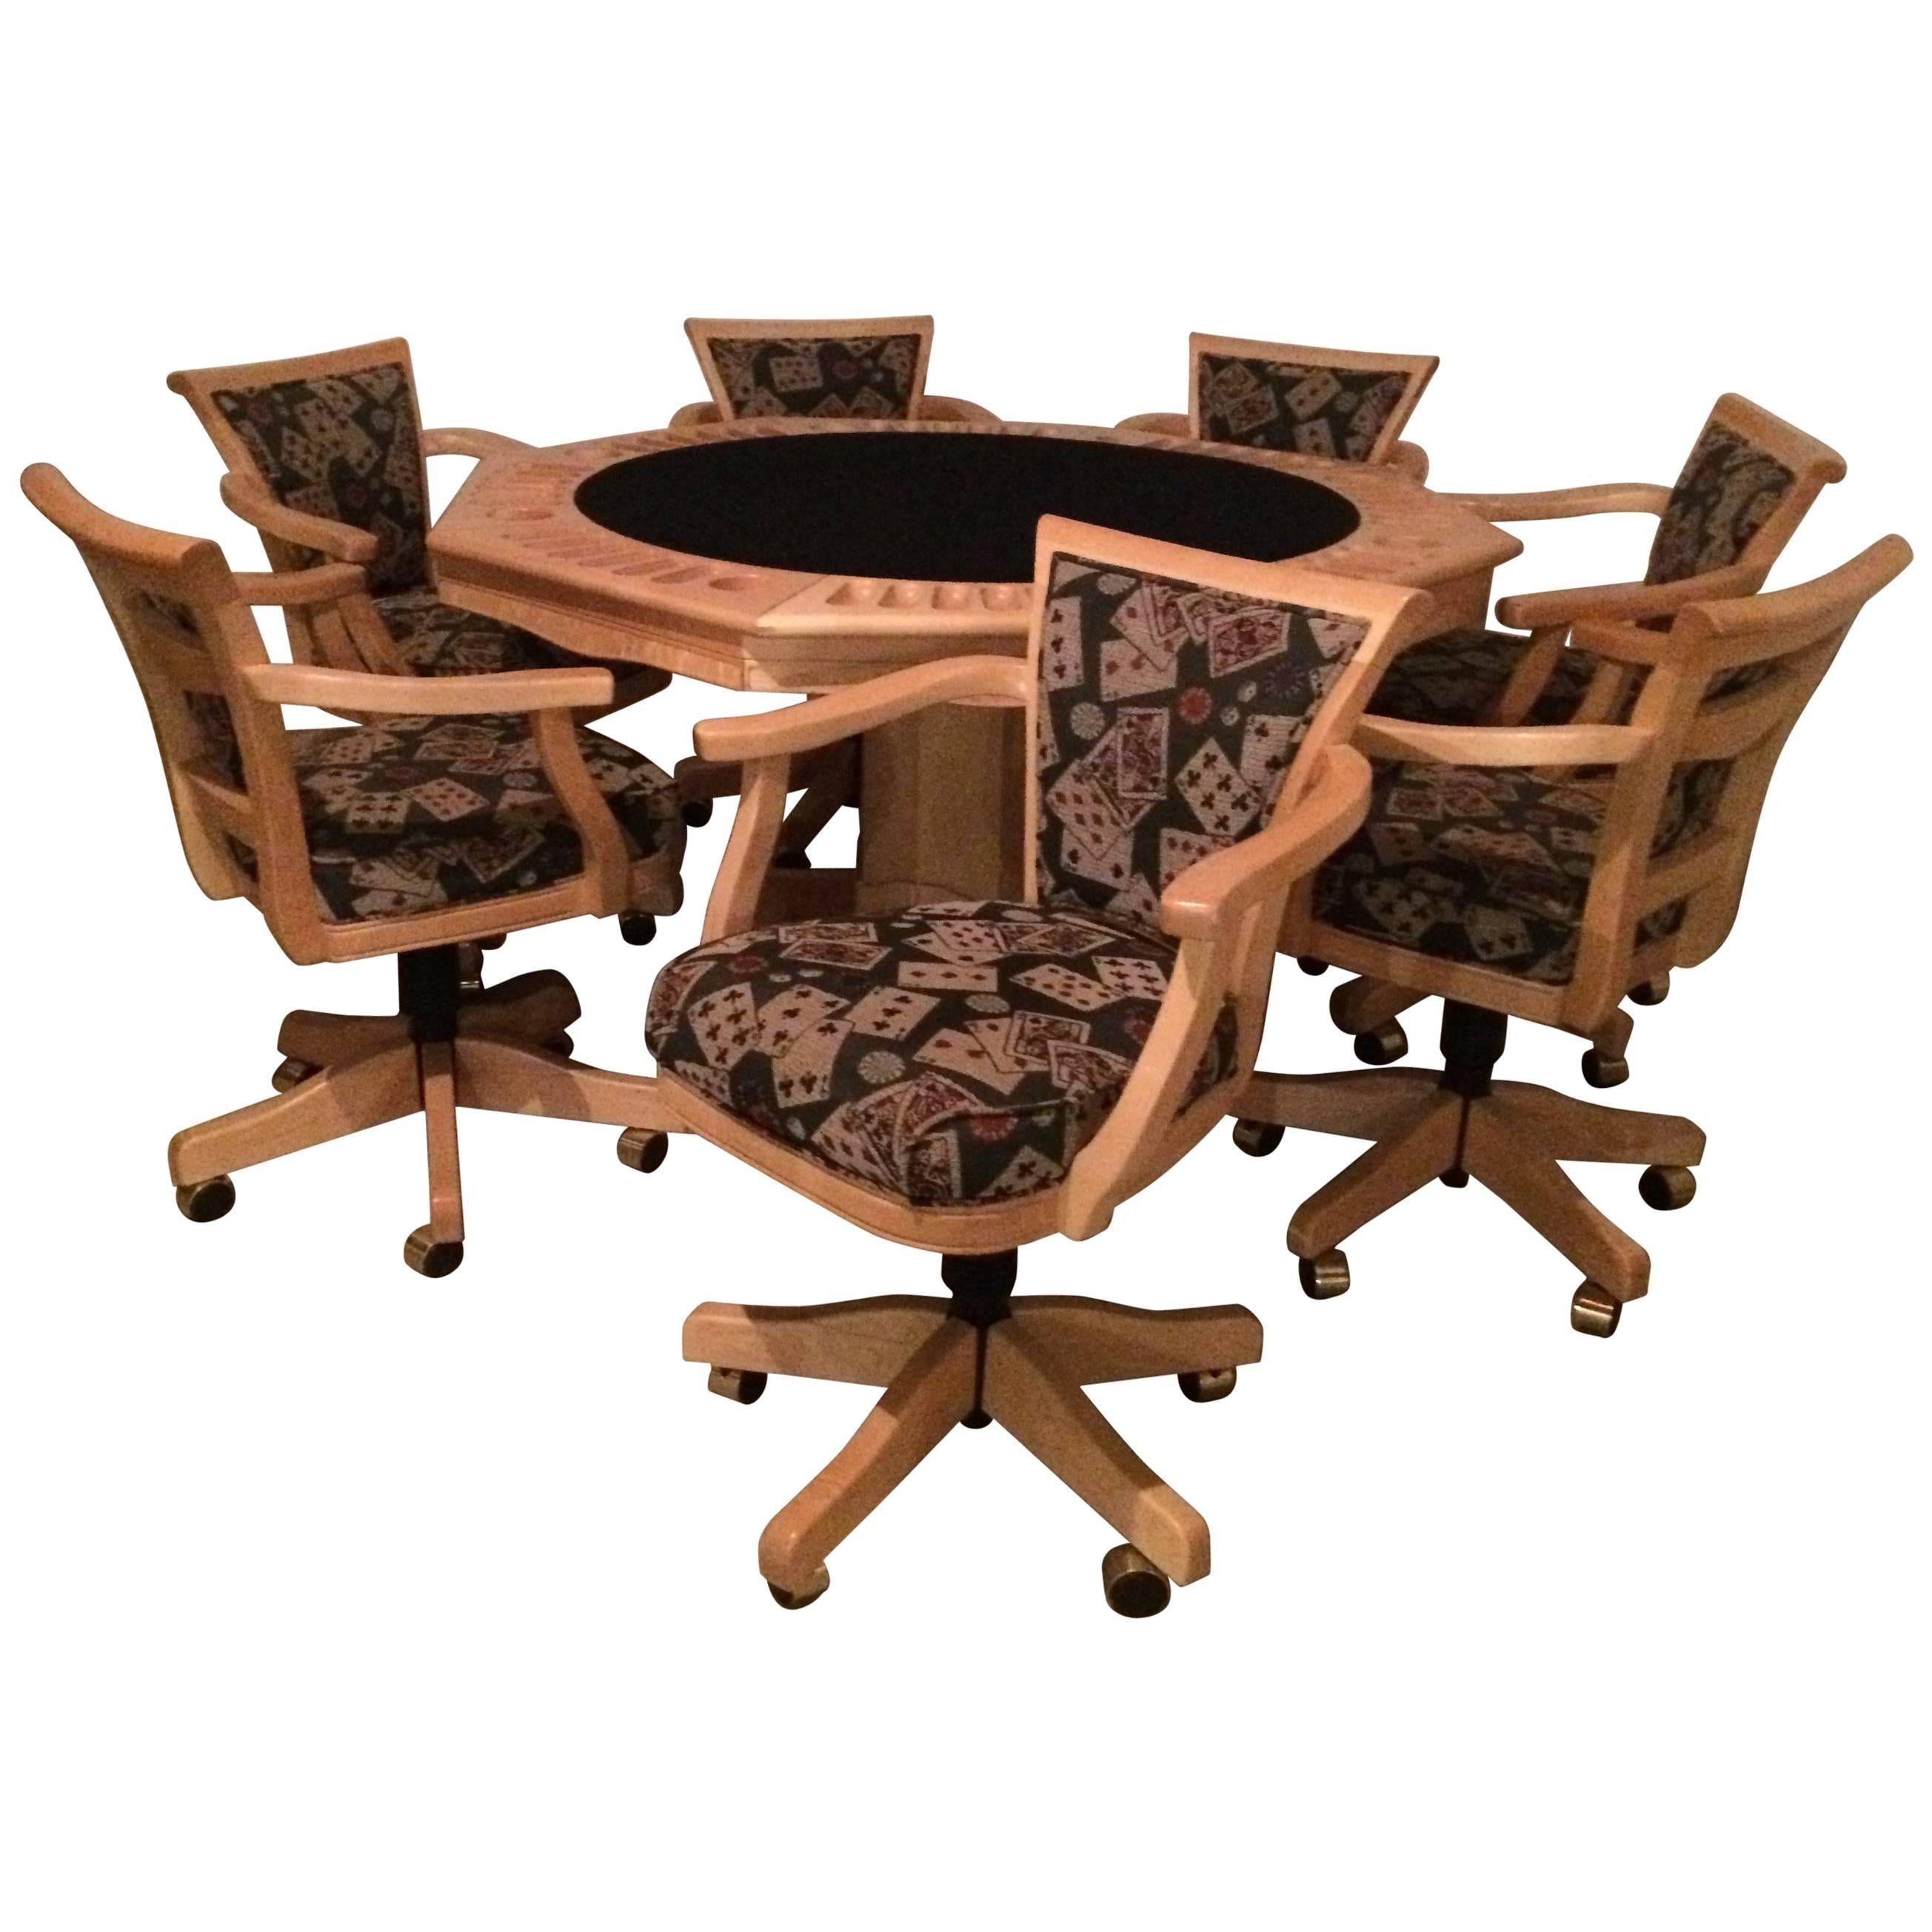 Fabulous Two-Sided Maple Game Table with Matching Adjustable Chairs